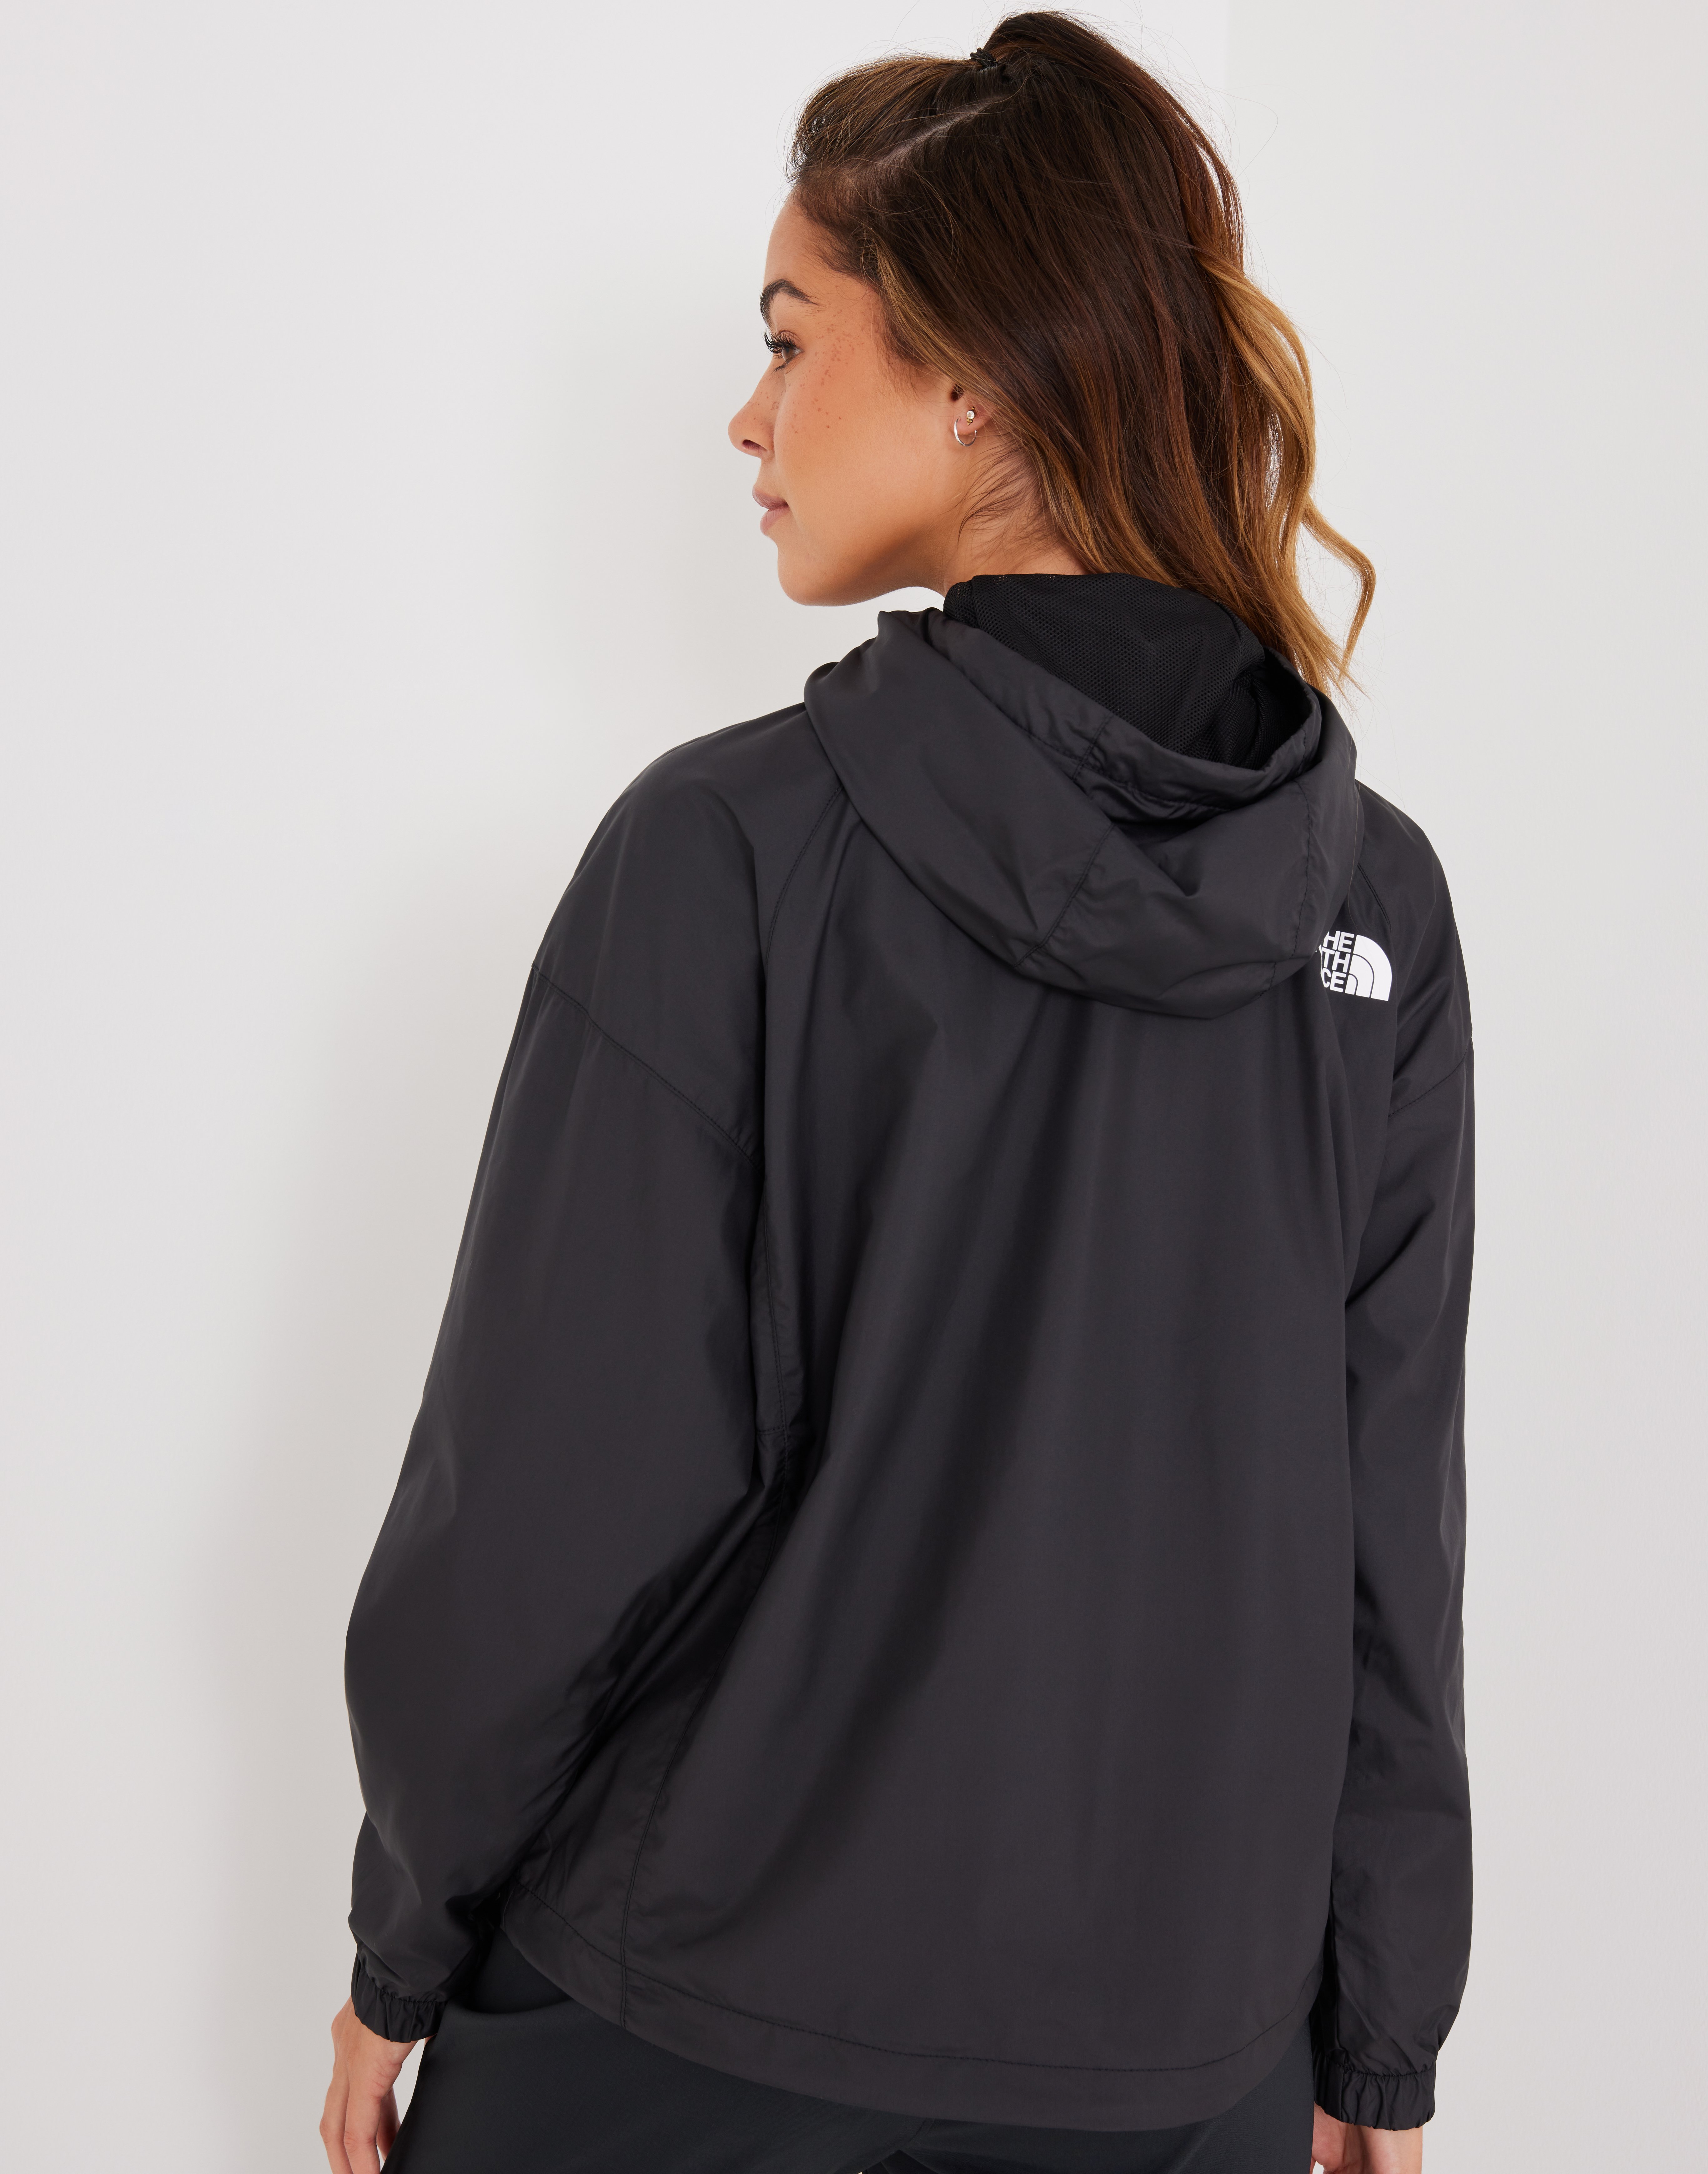 Buy The North Face W HYDRENALINE JACKET 2000 - Black | Nelly.com